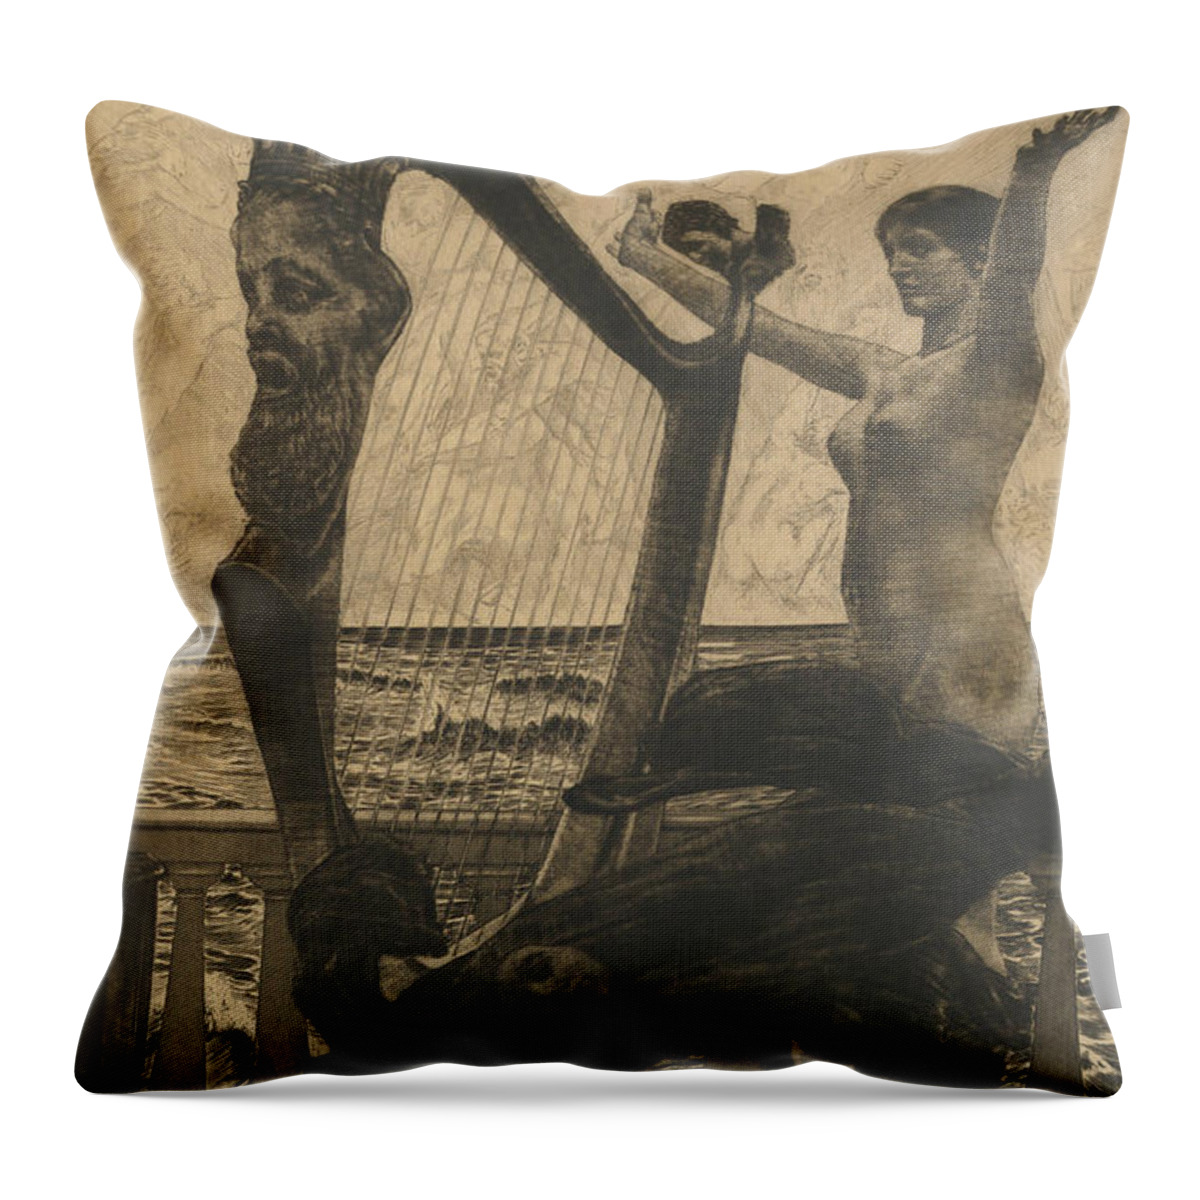 19th Century Art Throw Pillow featuring the relief Evocation by Max Klinger